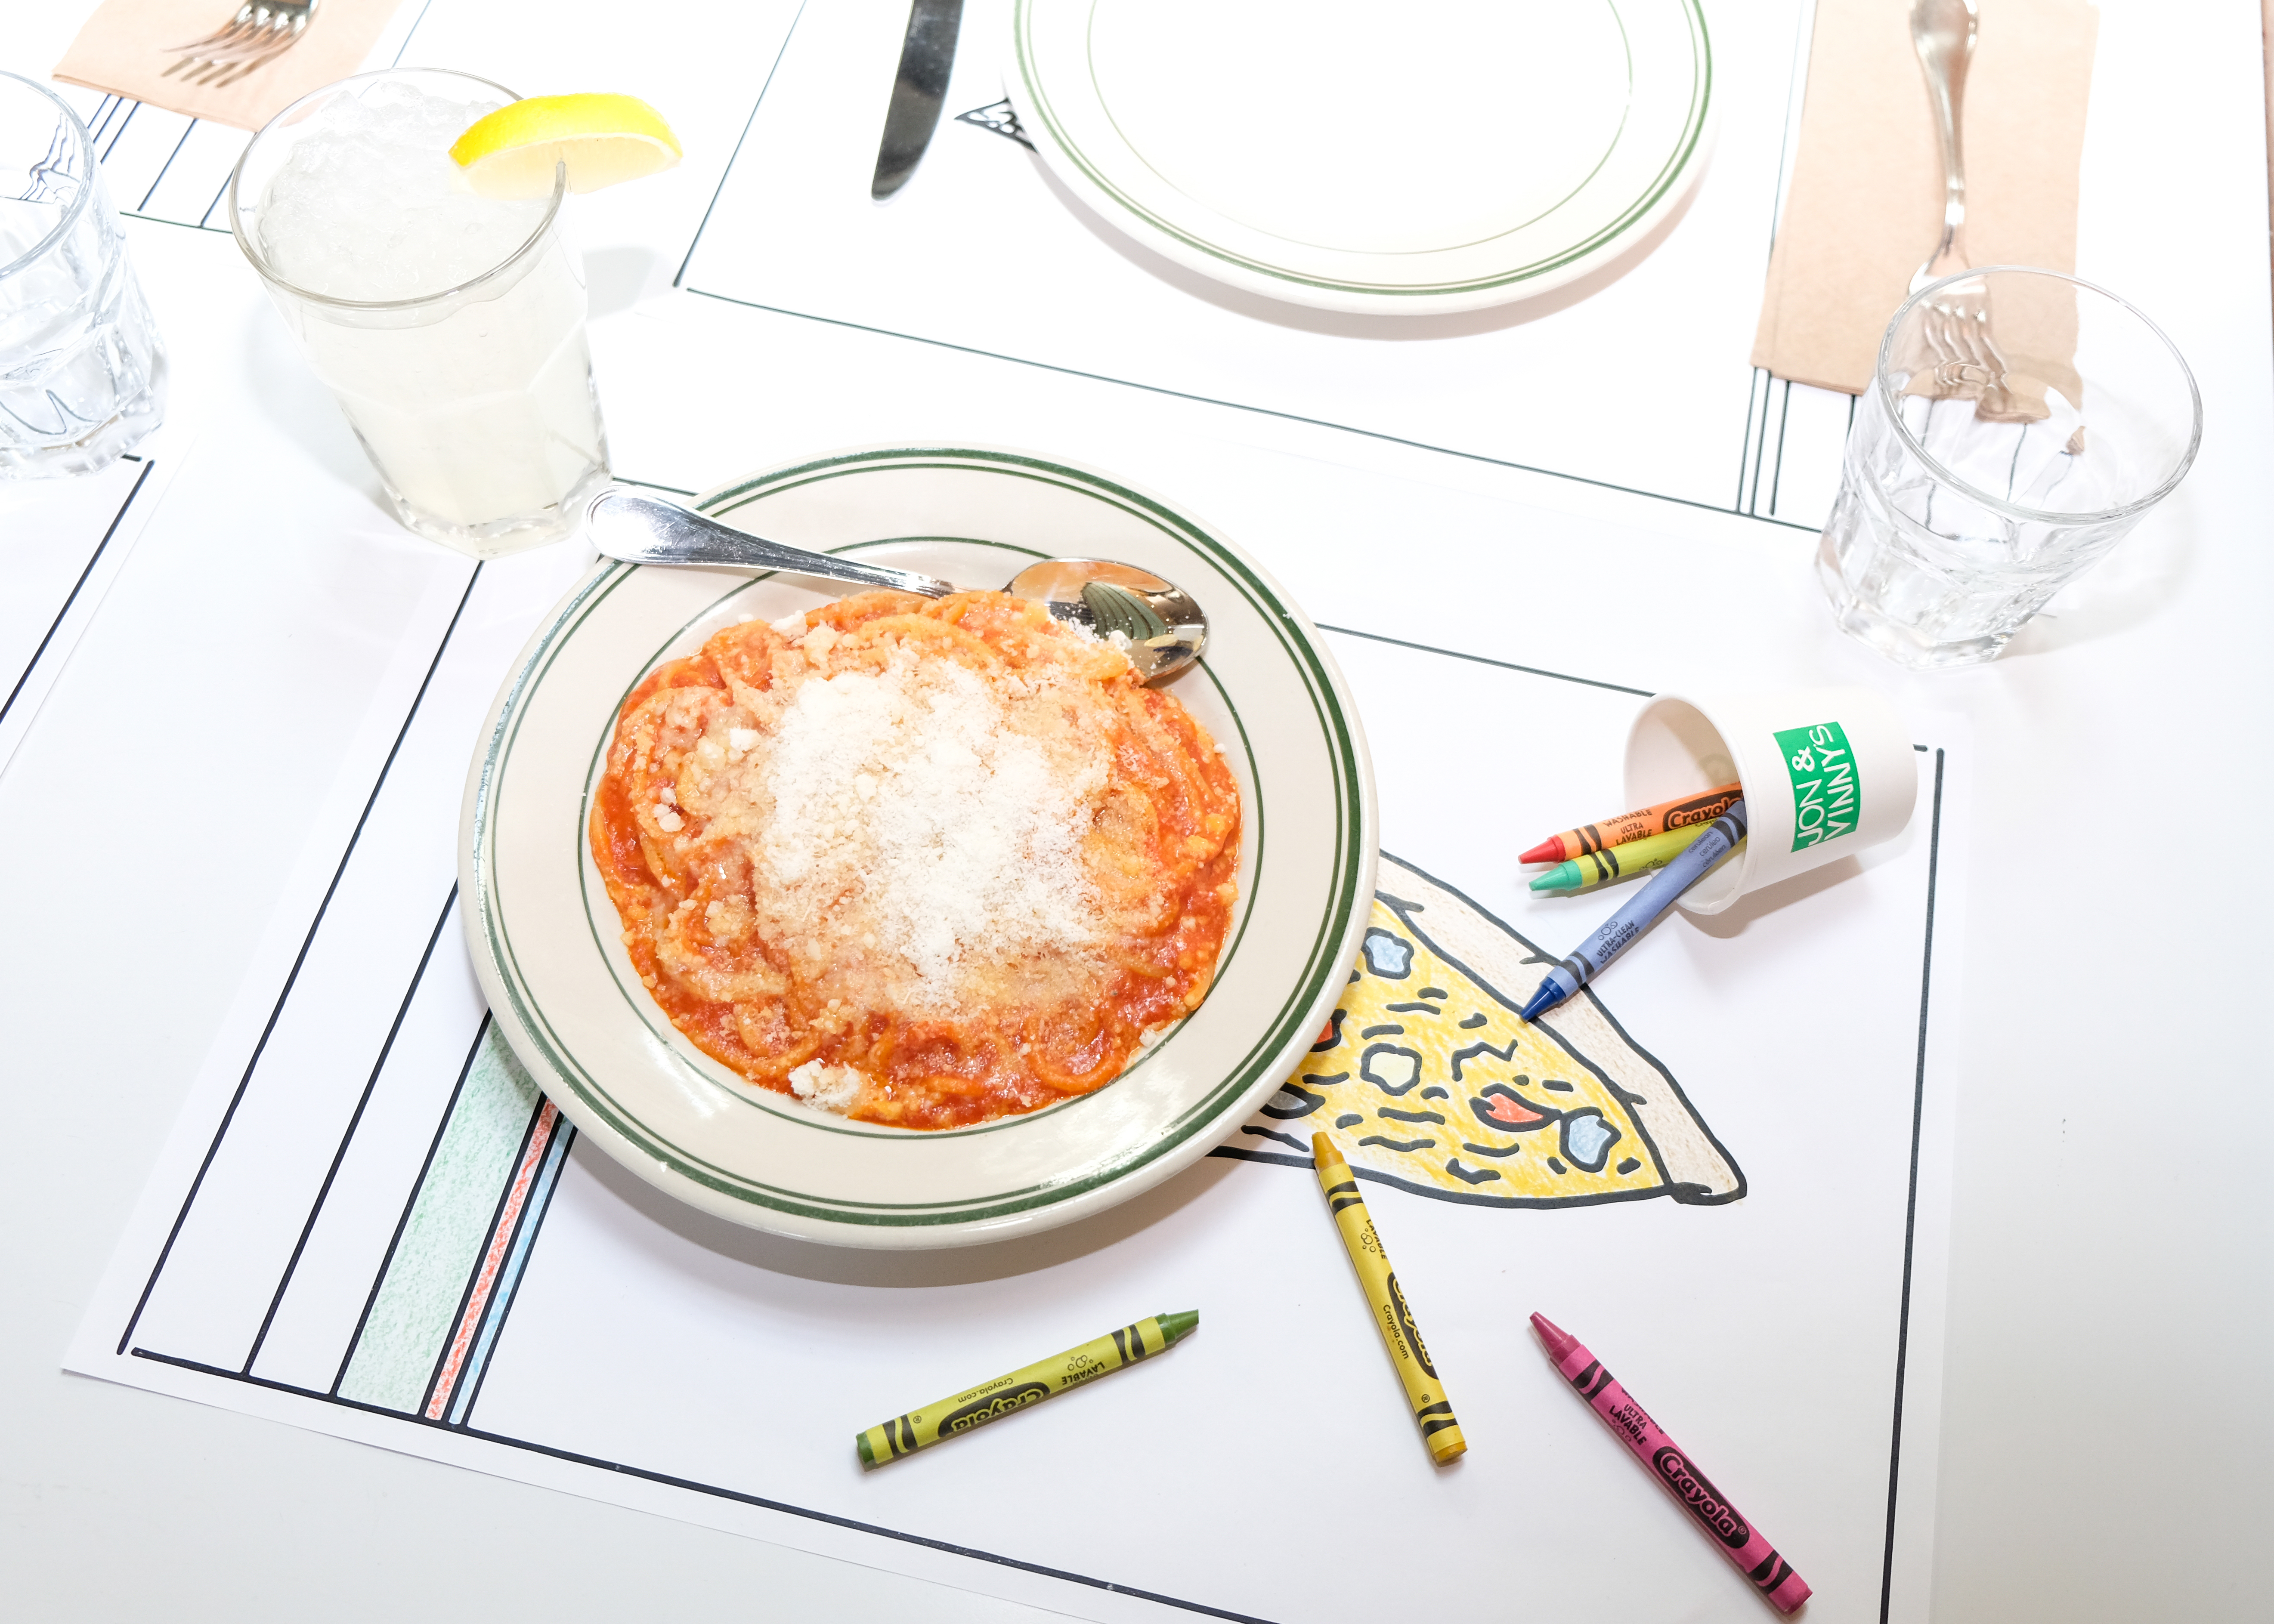 A white paper place mat with a black outline drawing of pizza is colored in with crayons on the table; a bowl of red sauce pasta in a white dish is also on the table.